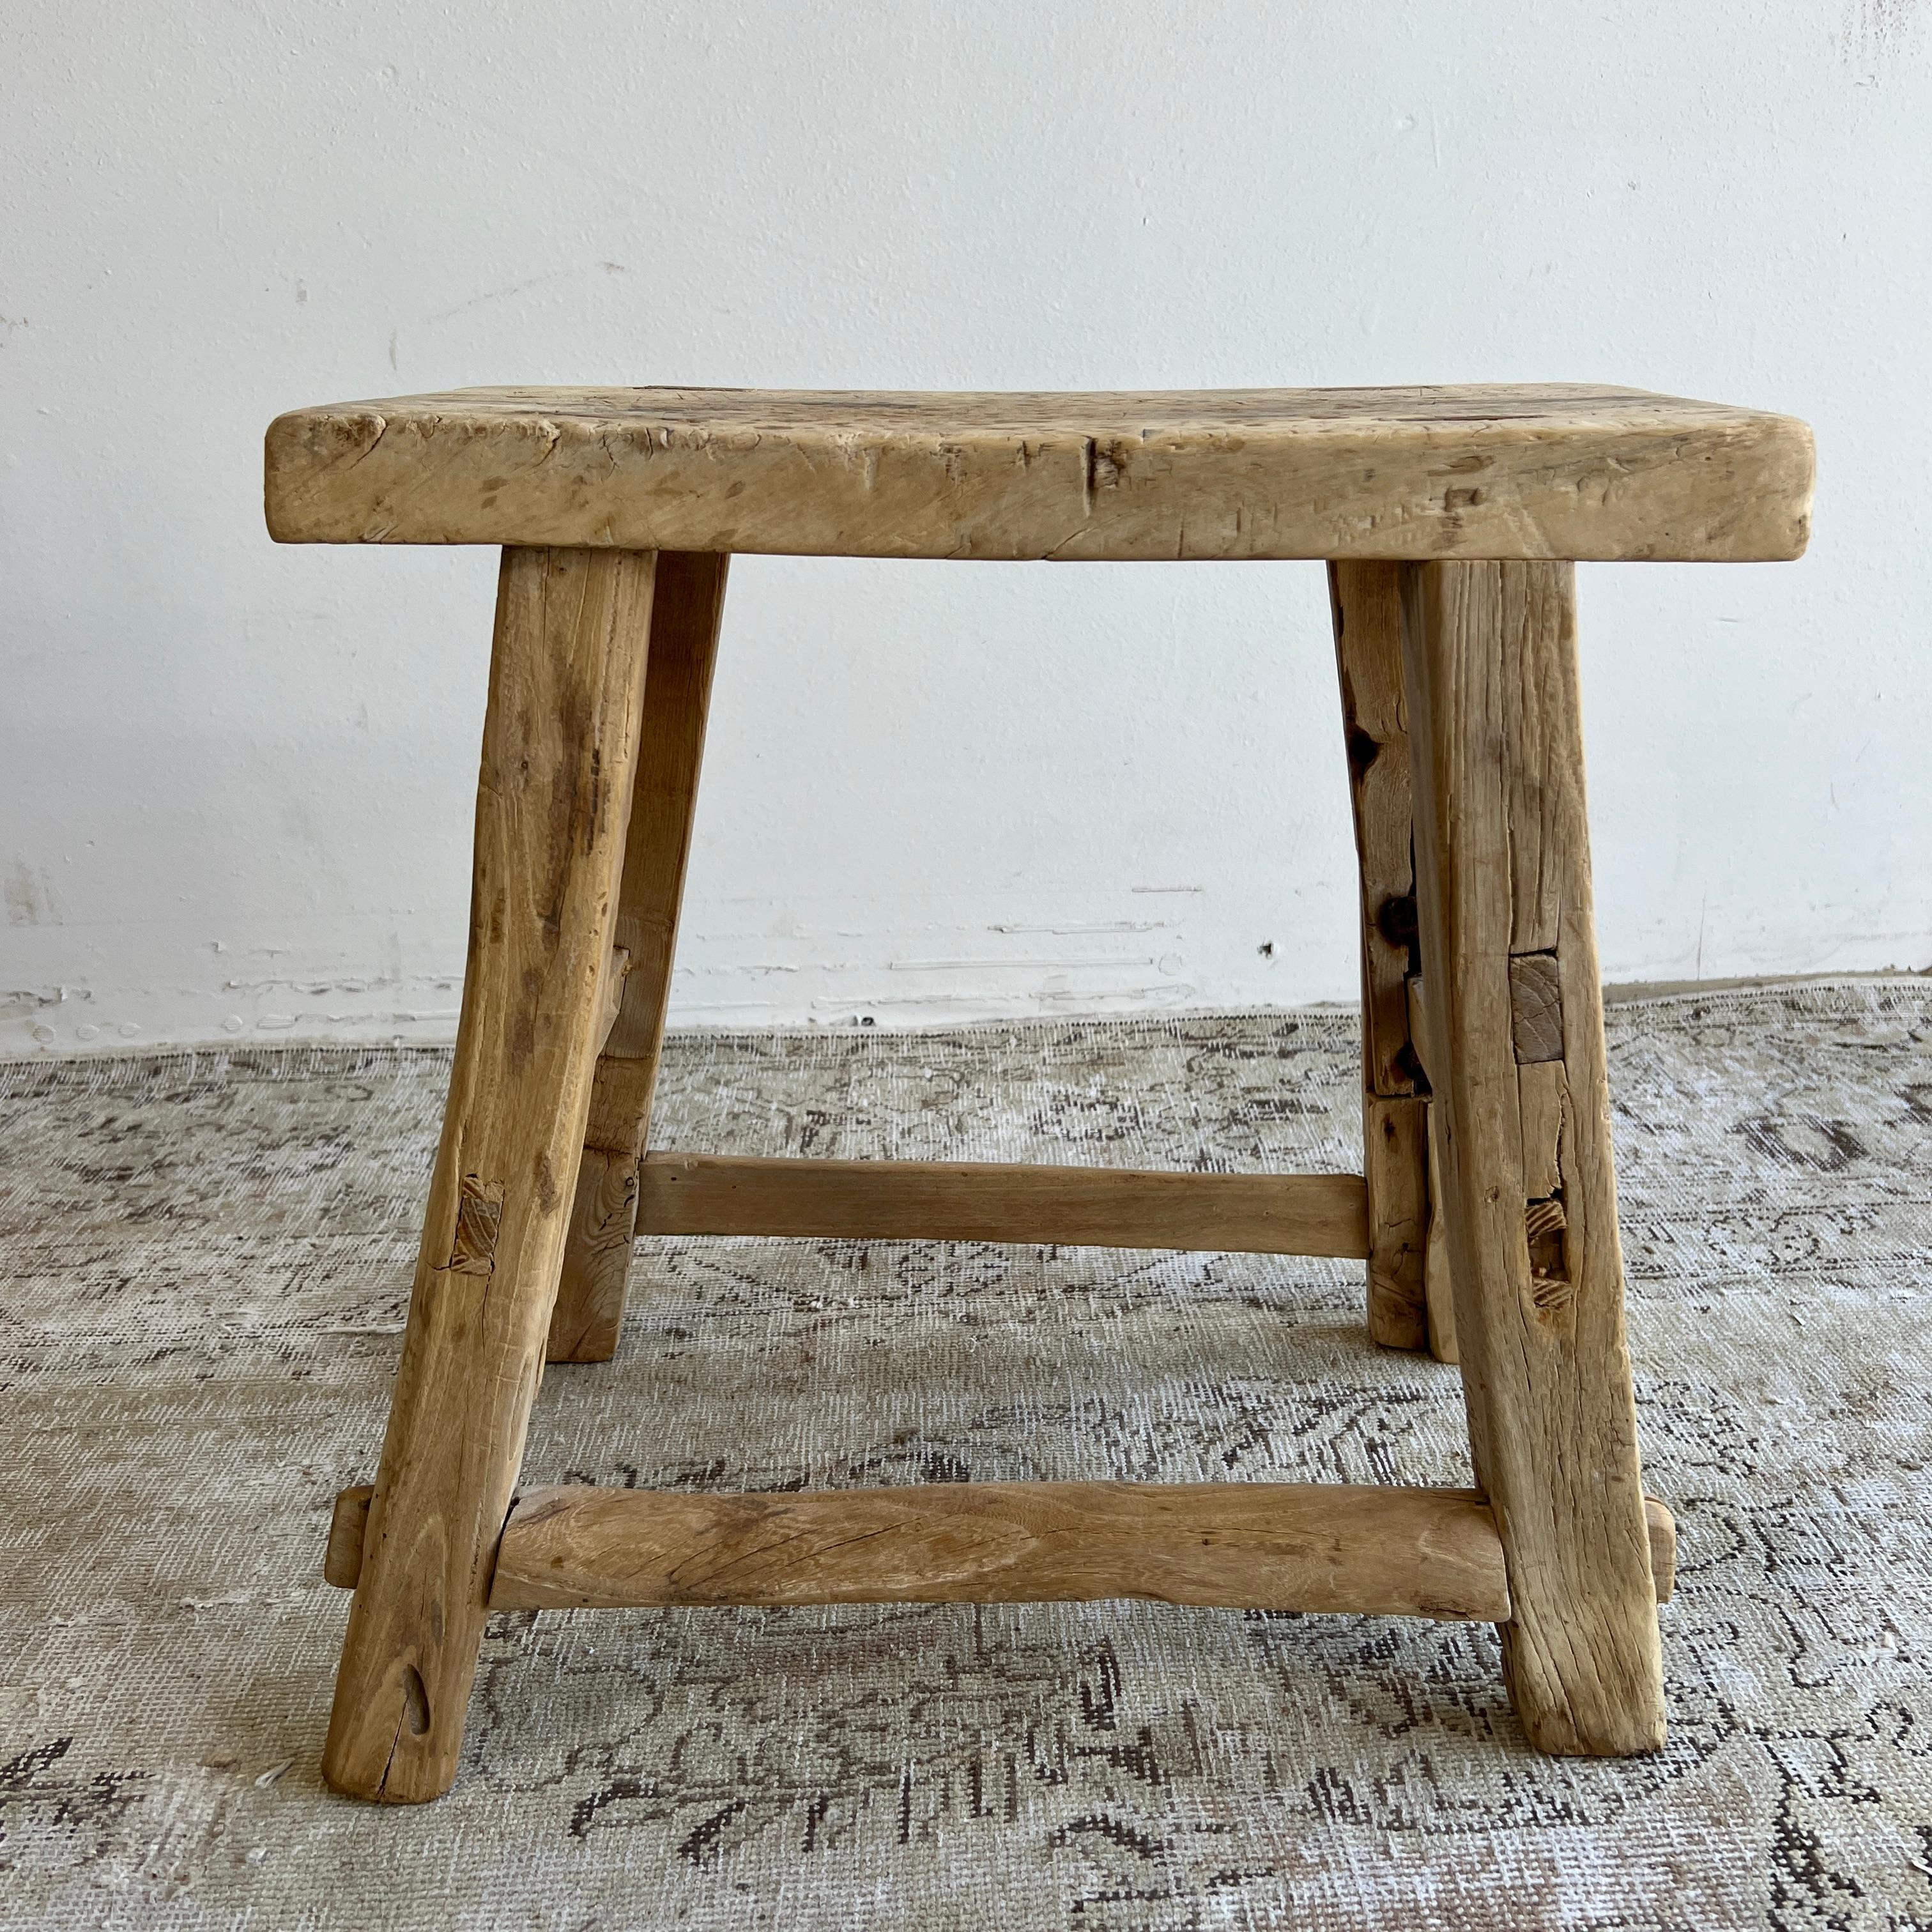 These are the real vintage antique elm wood stools! Beautiful antique patina, with weathering and age, these are solid and sturdy ready for daily use, use as a table, stool, drink table, they are great for any space.
Size: 19.5